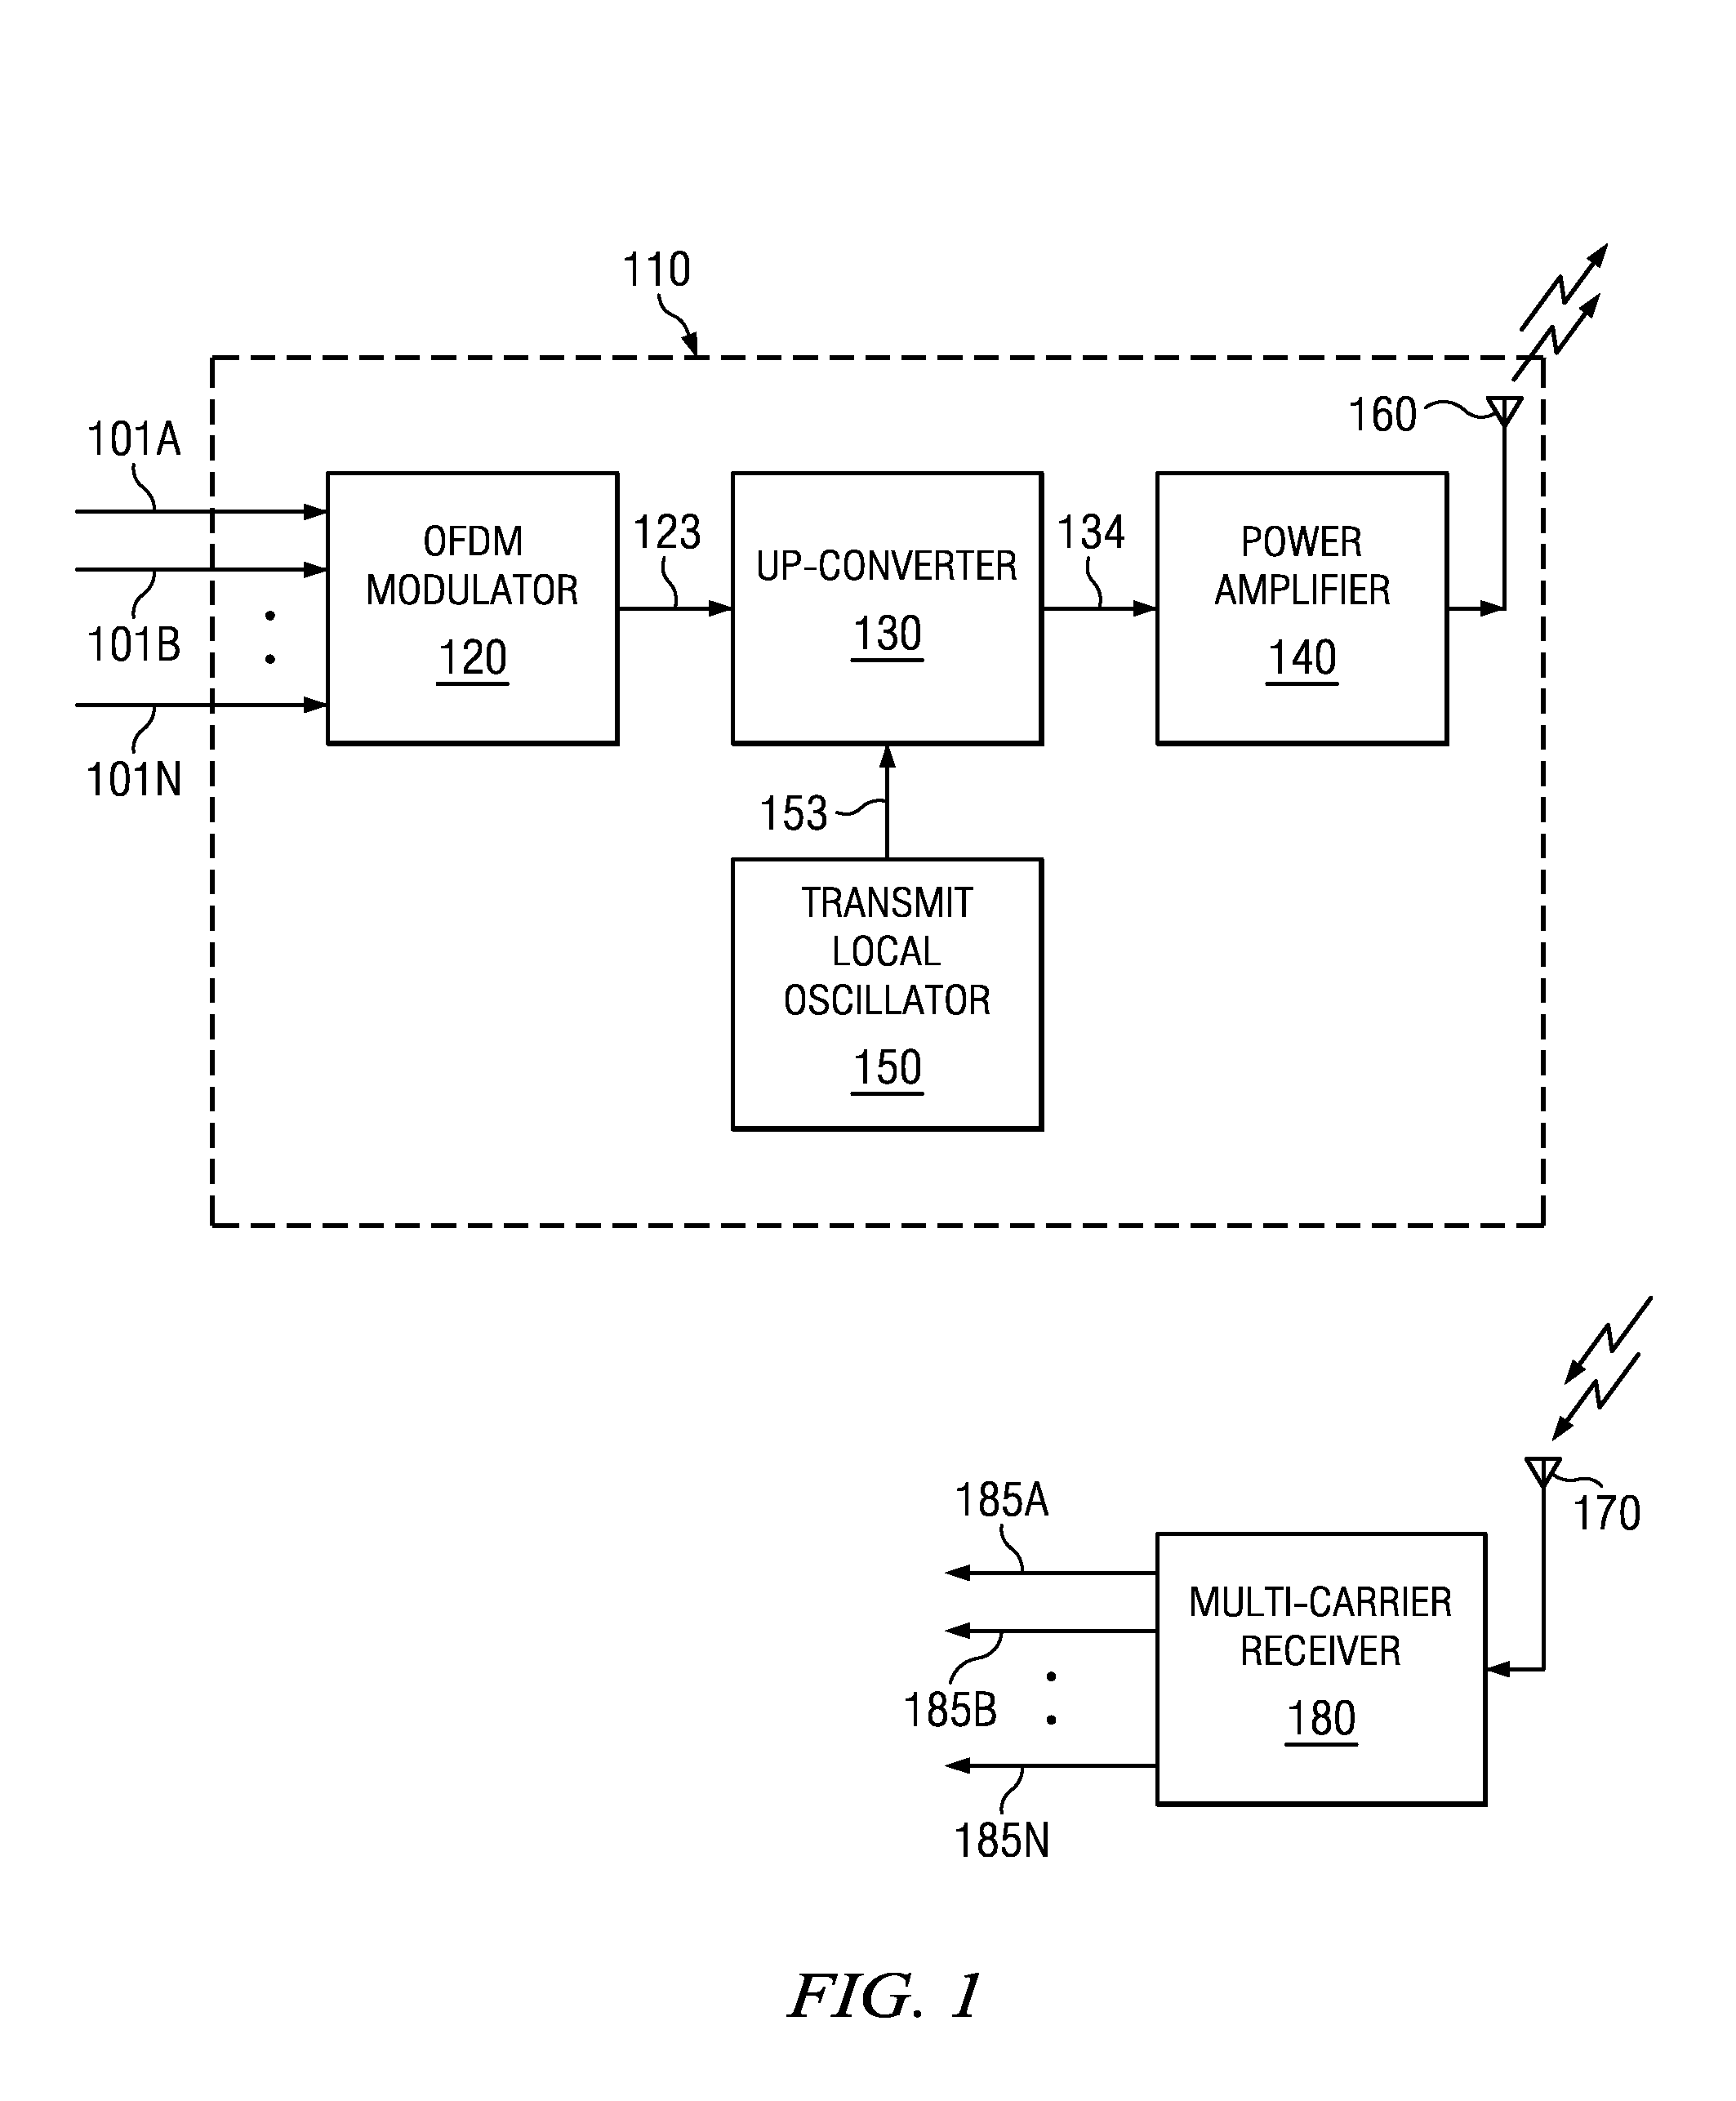 Correcting for carrier frequency offset in multi-carrier communication systems